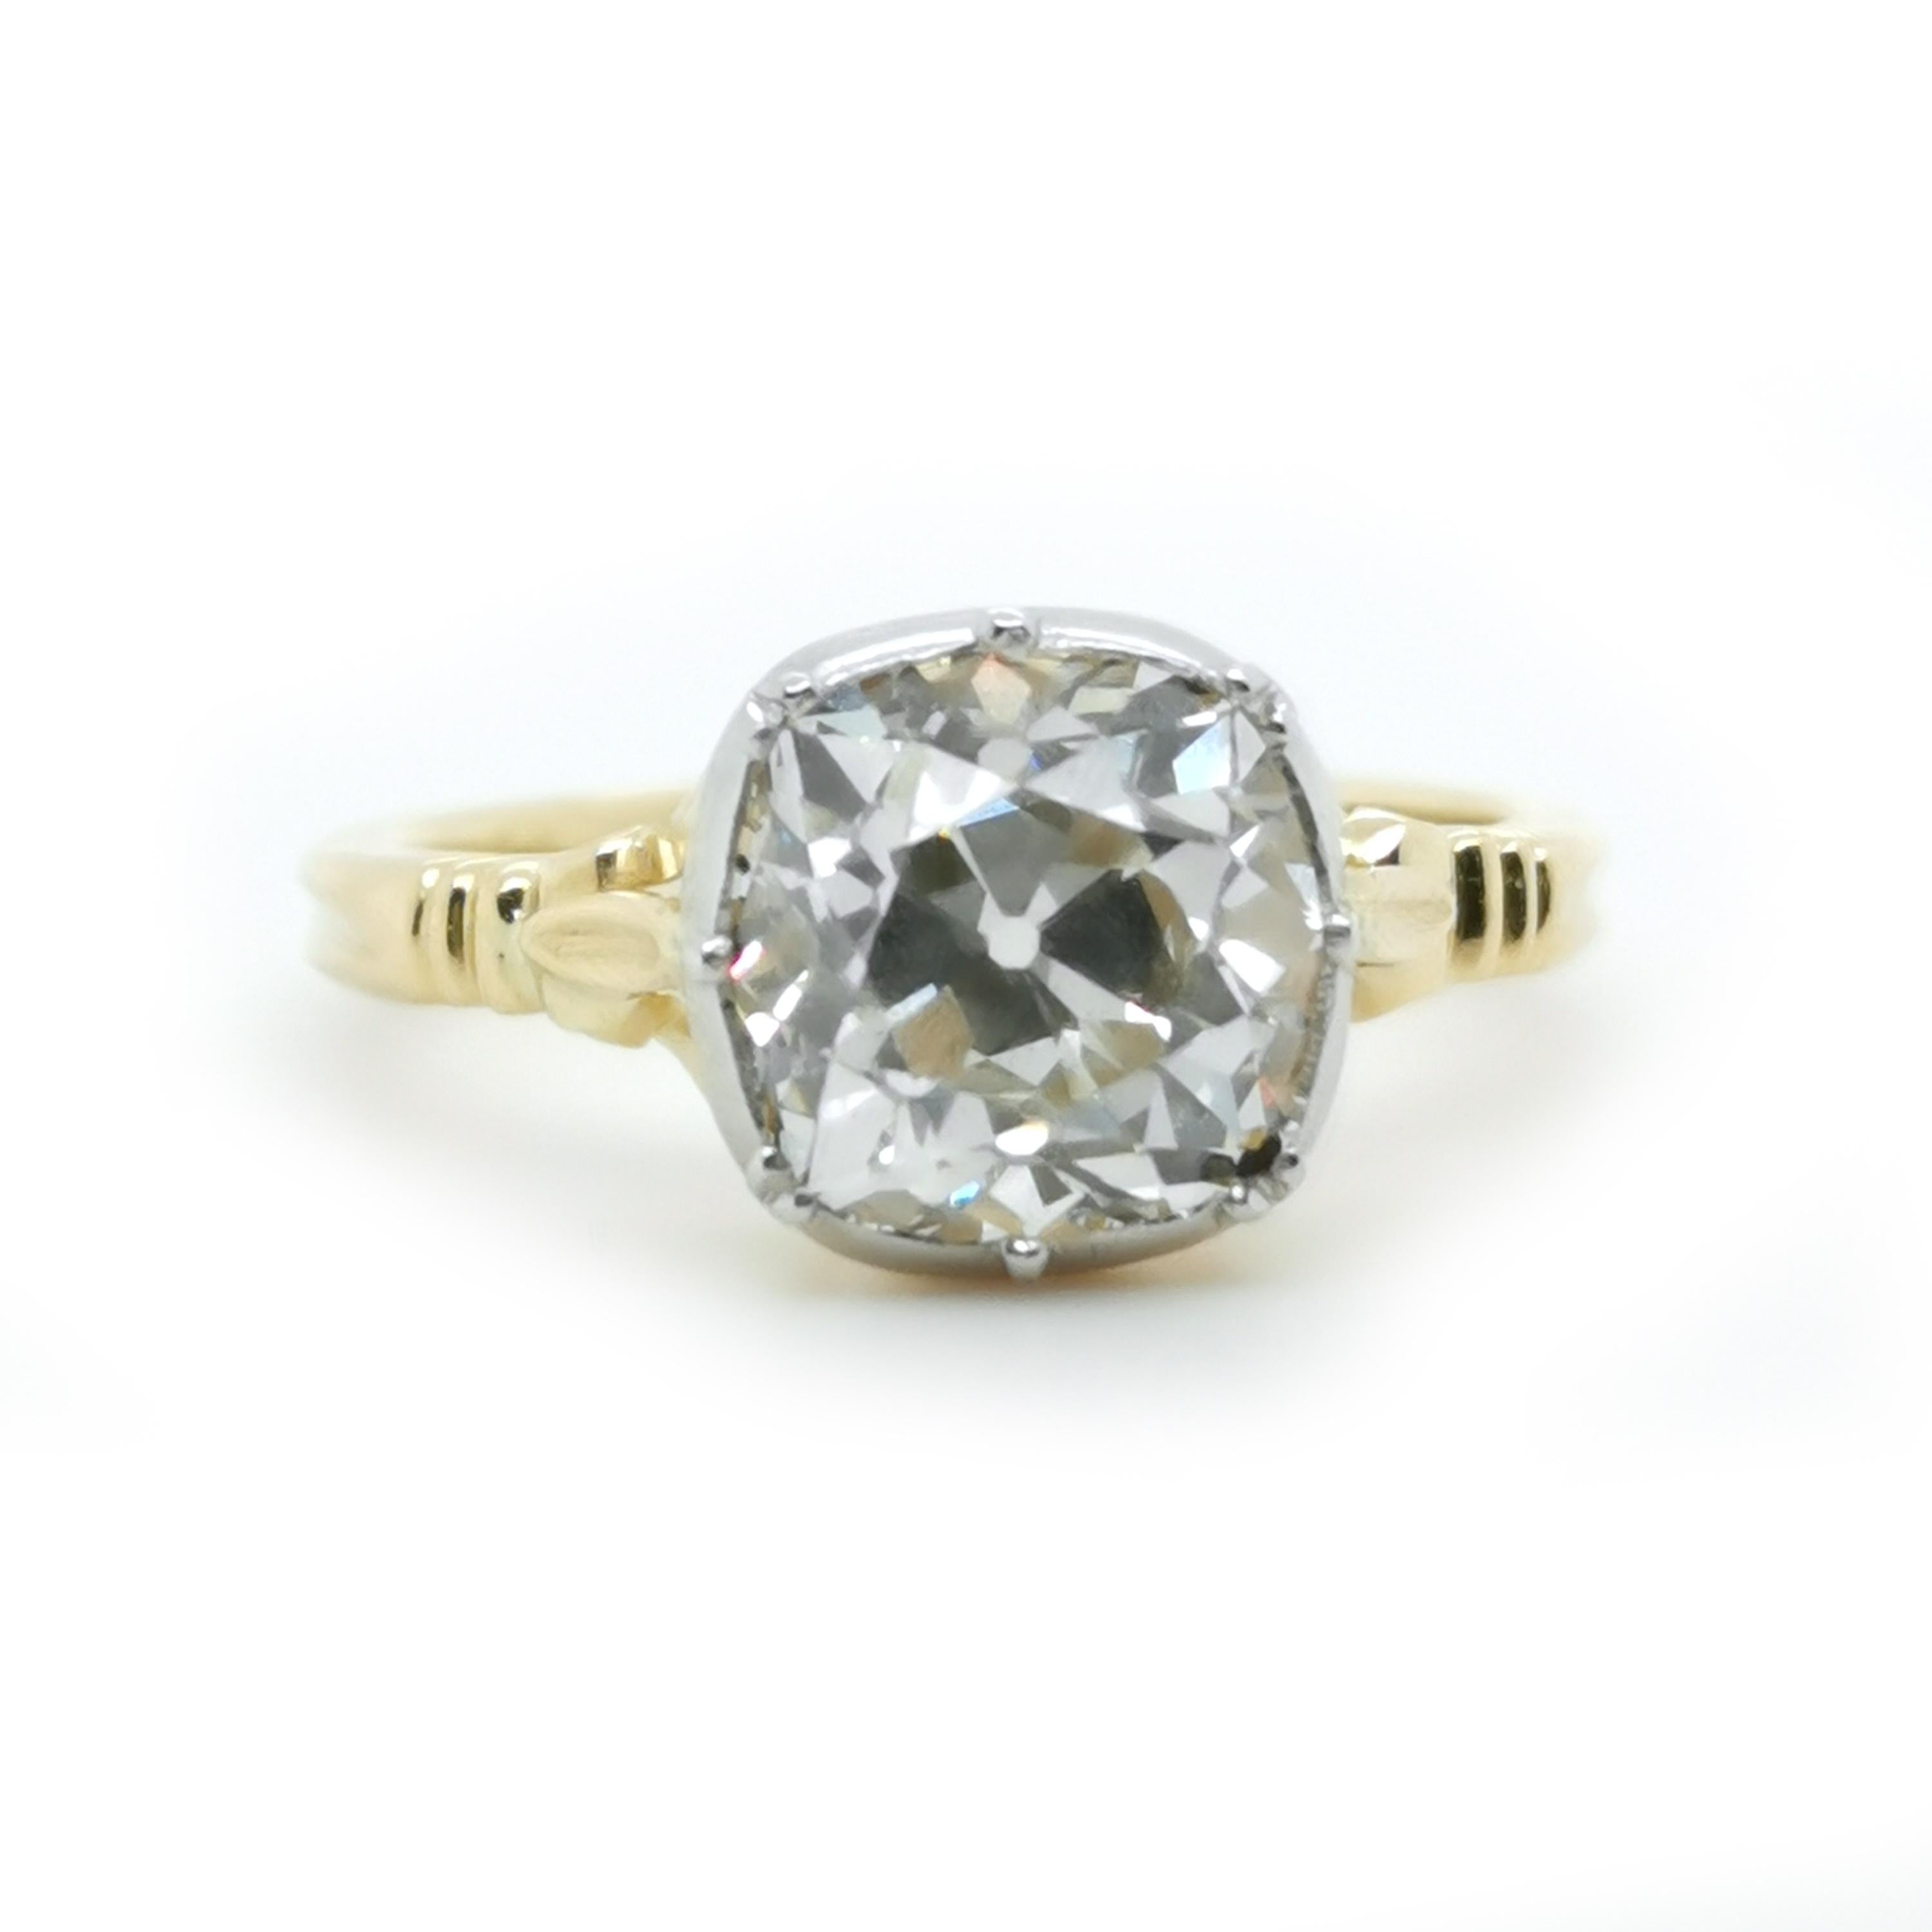 A new Georgian style diamond, gold and platinum solitaire ring, set with a 2.72 carat, J colour, VS2 clarity, cushion shaped old-cut diamond, in a platinum topped, cut down setting, onto a gold bowl, with fleur-de-lys trefoil shoulders, with two